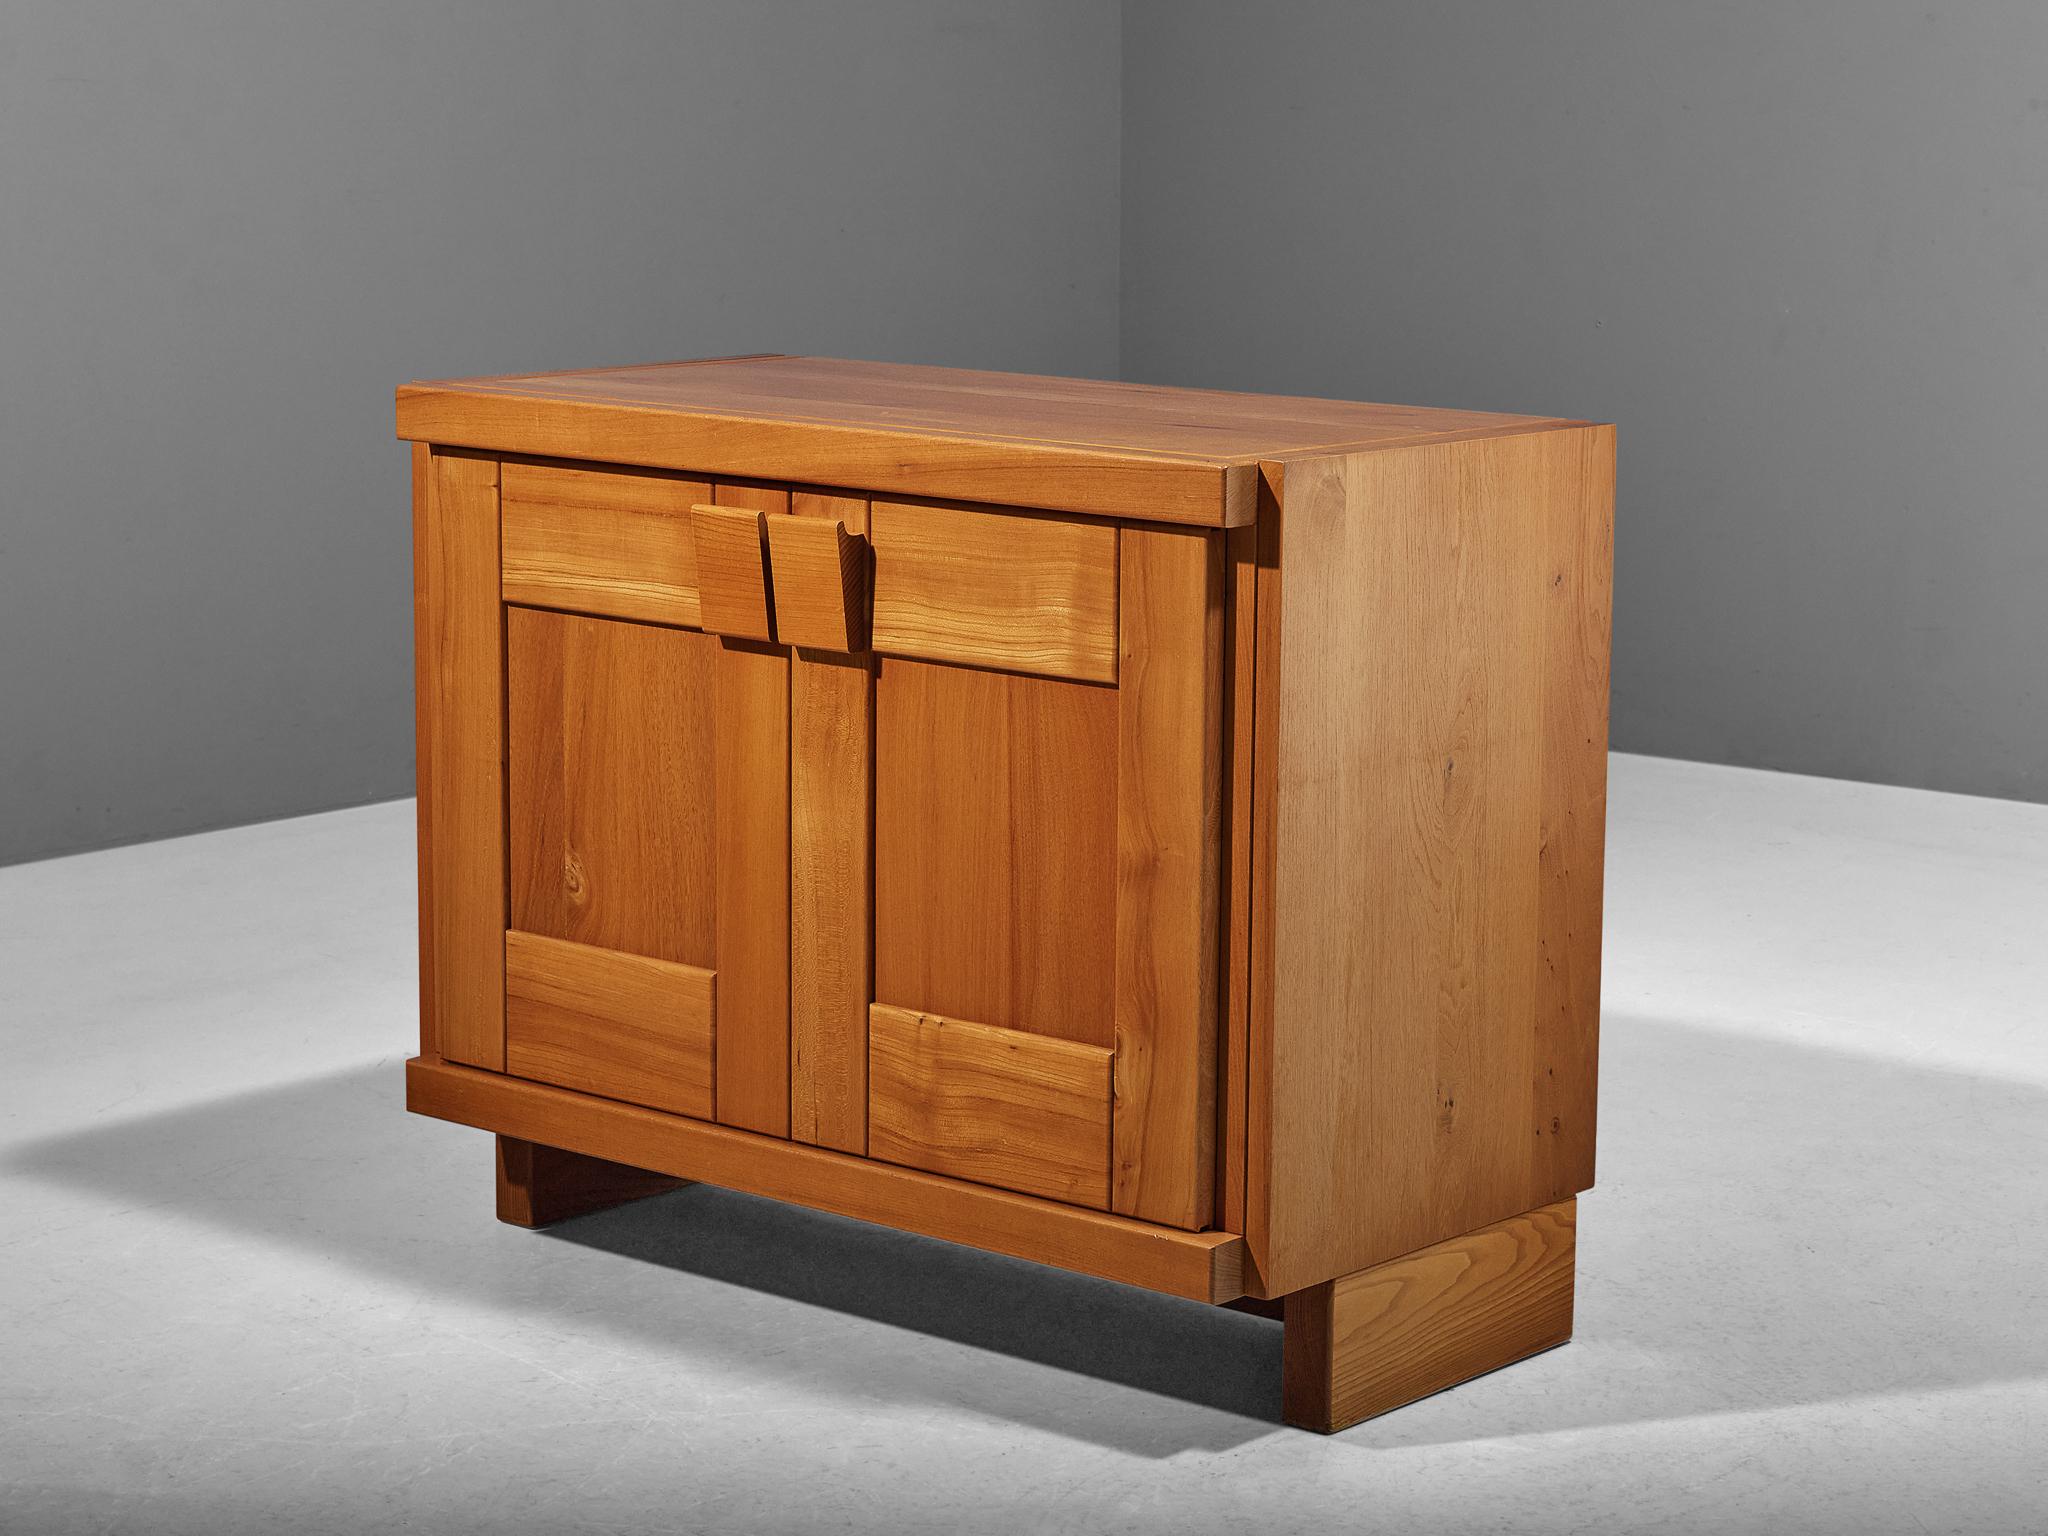 Cabinet, elm, France, 1970s

Stunning French cabinet executed in elm, designed by Maison Regain. The sideboard is sturdy and combines a simplified yet complex design with nifty, solid construction details that characterize Maison Regain's designs.